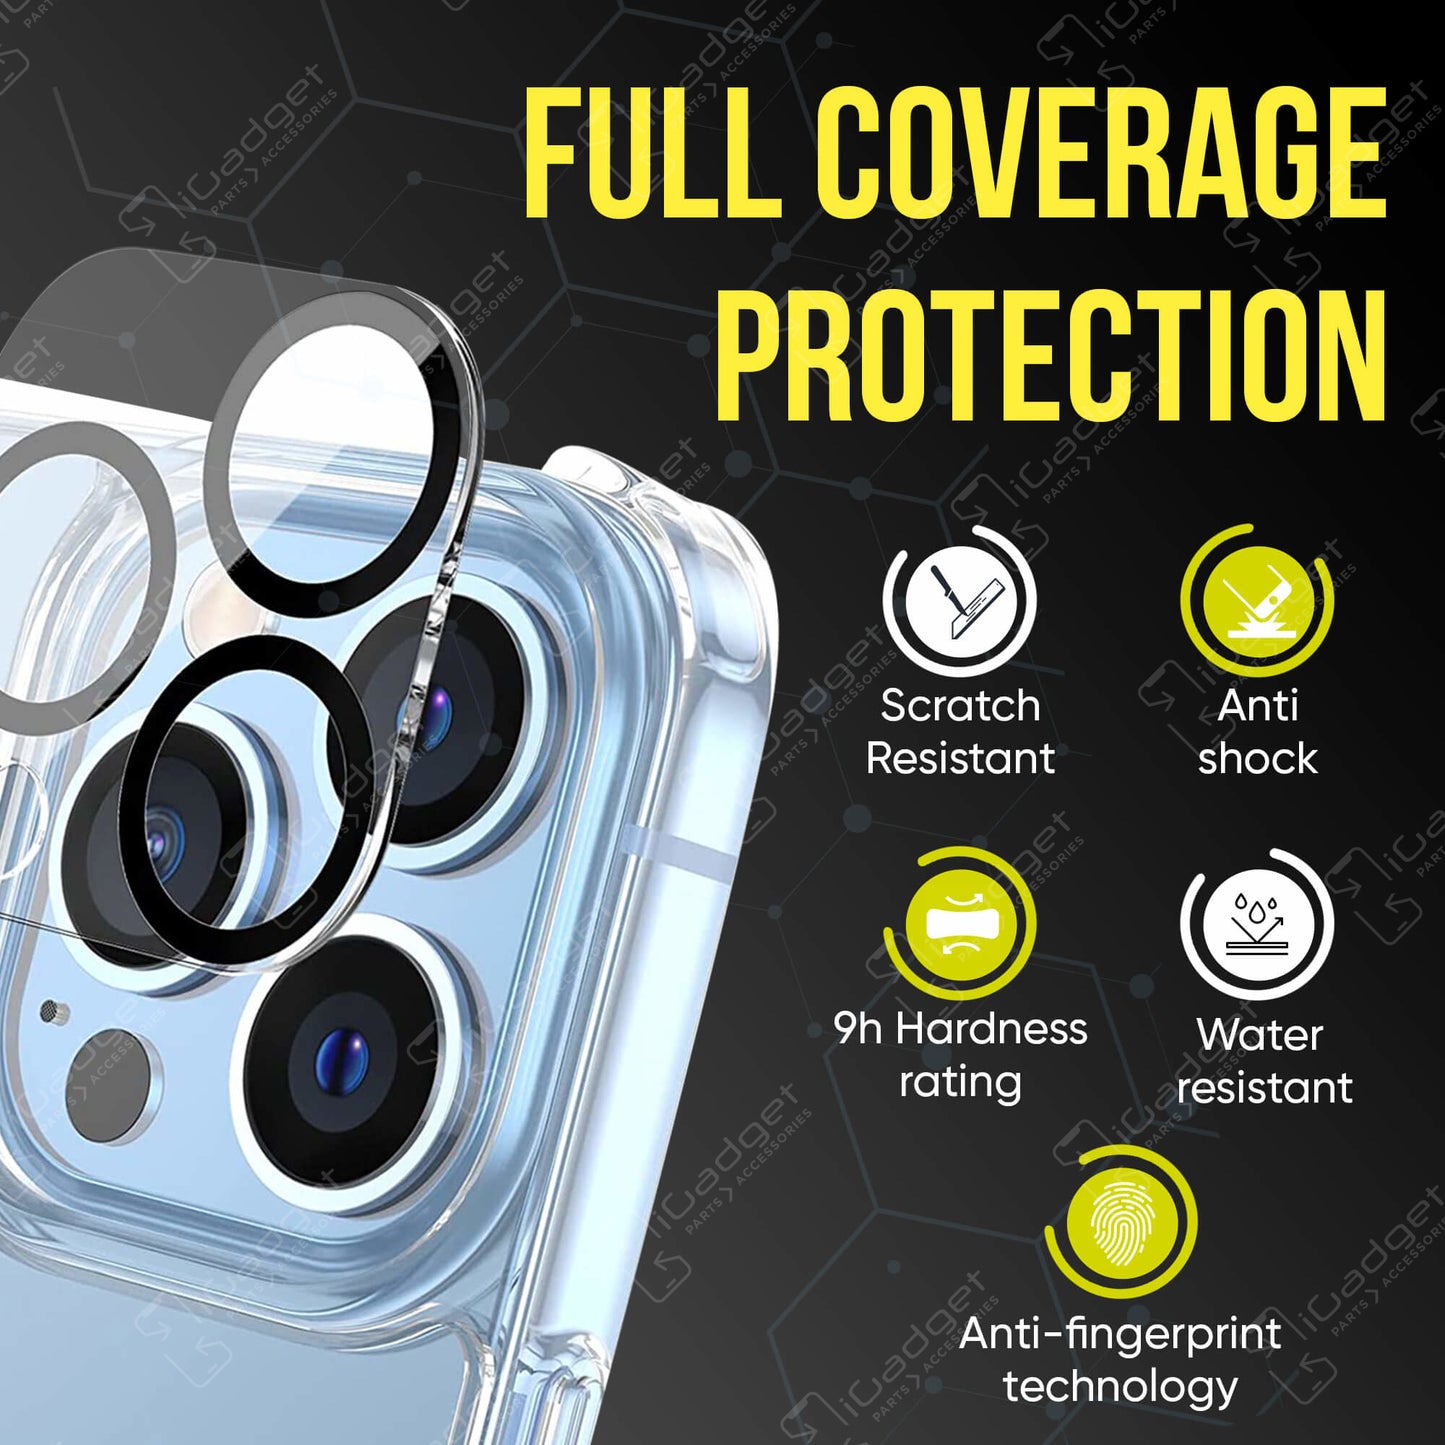 iPhone 11 Pro/iPhone 11 Pro Max Tempered Glass Camera Lens Cover Protector